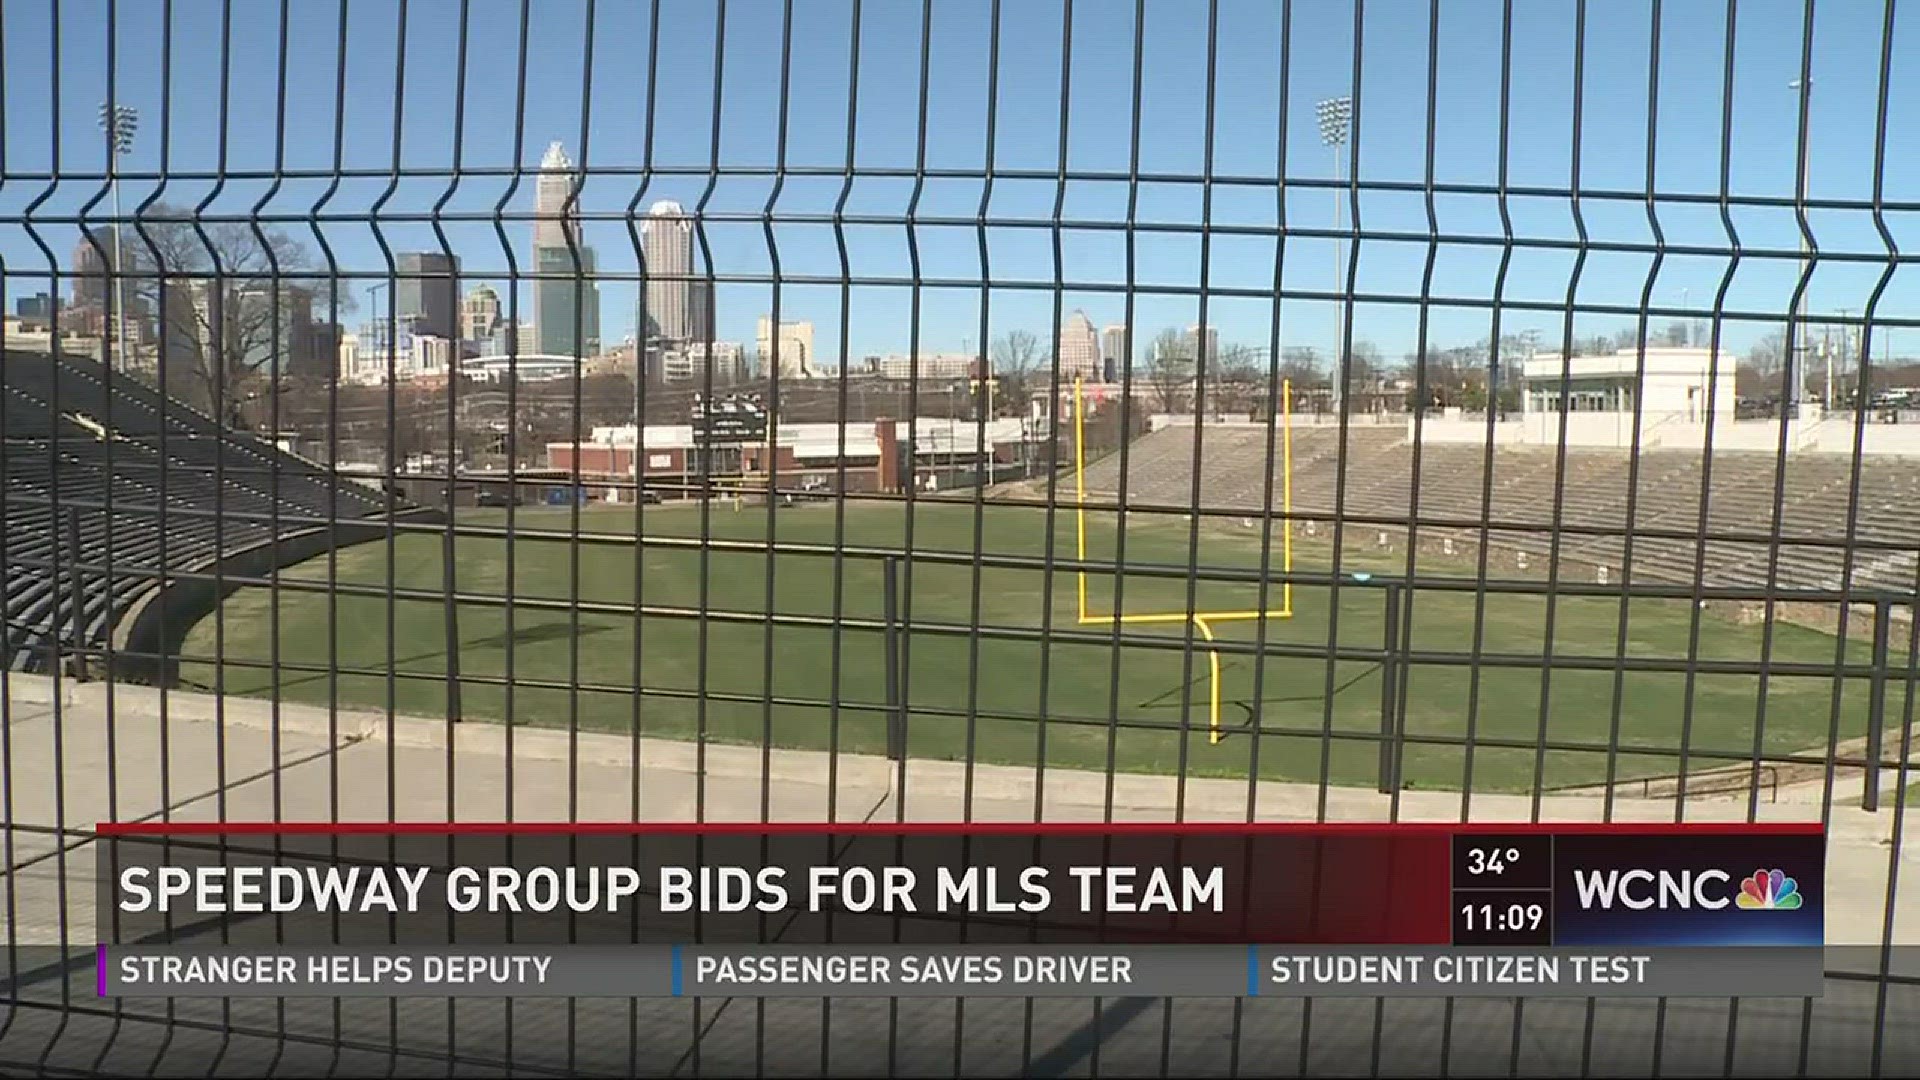 Despite last week's decision by the City to not even vote on a proposed MLS stadium, there's still a chance Charlotte could land a team.